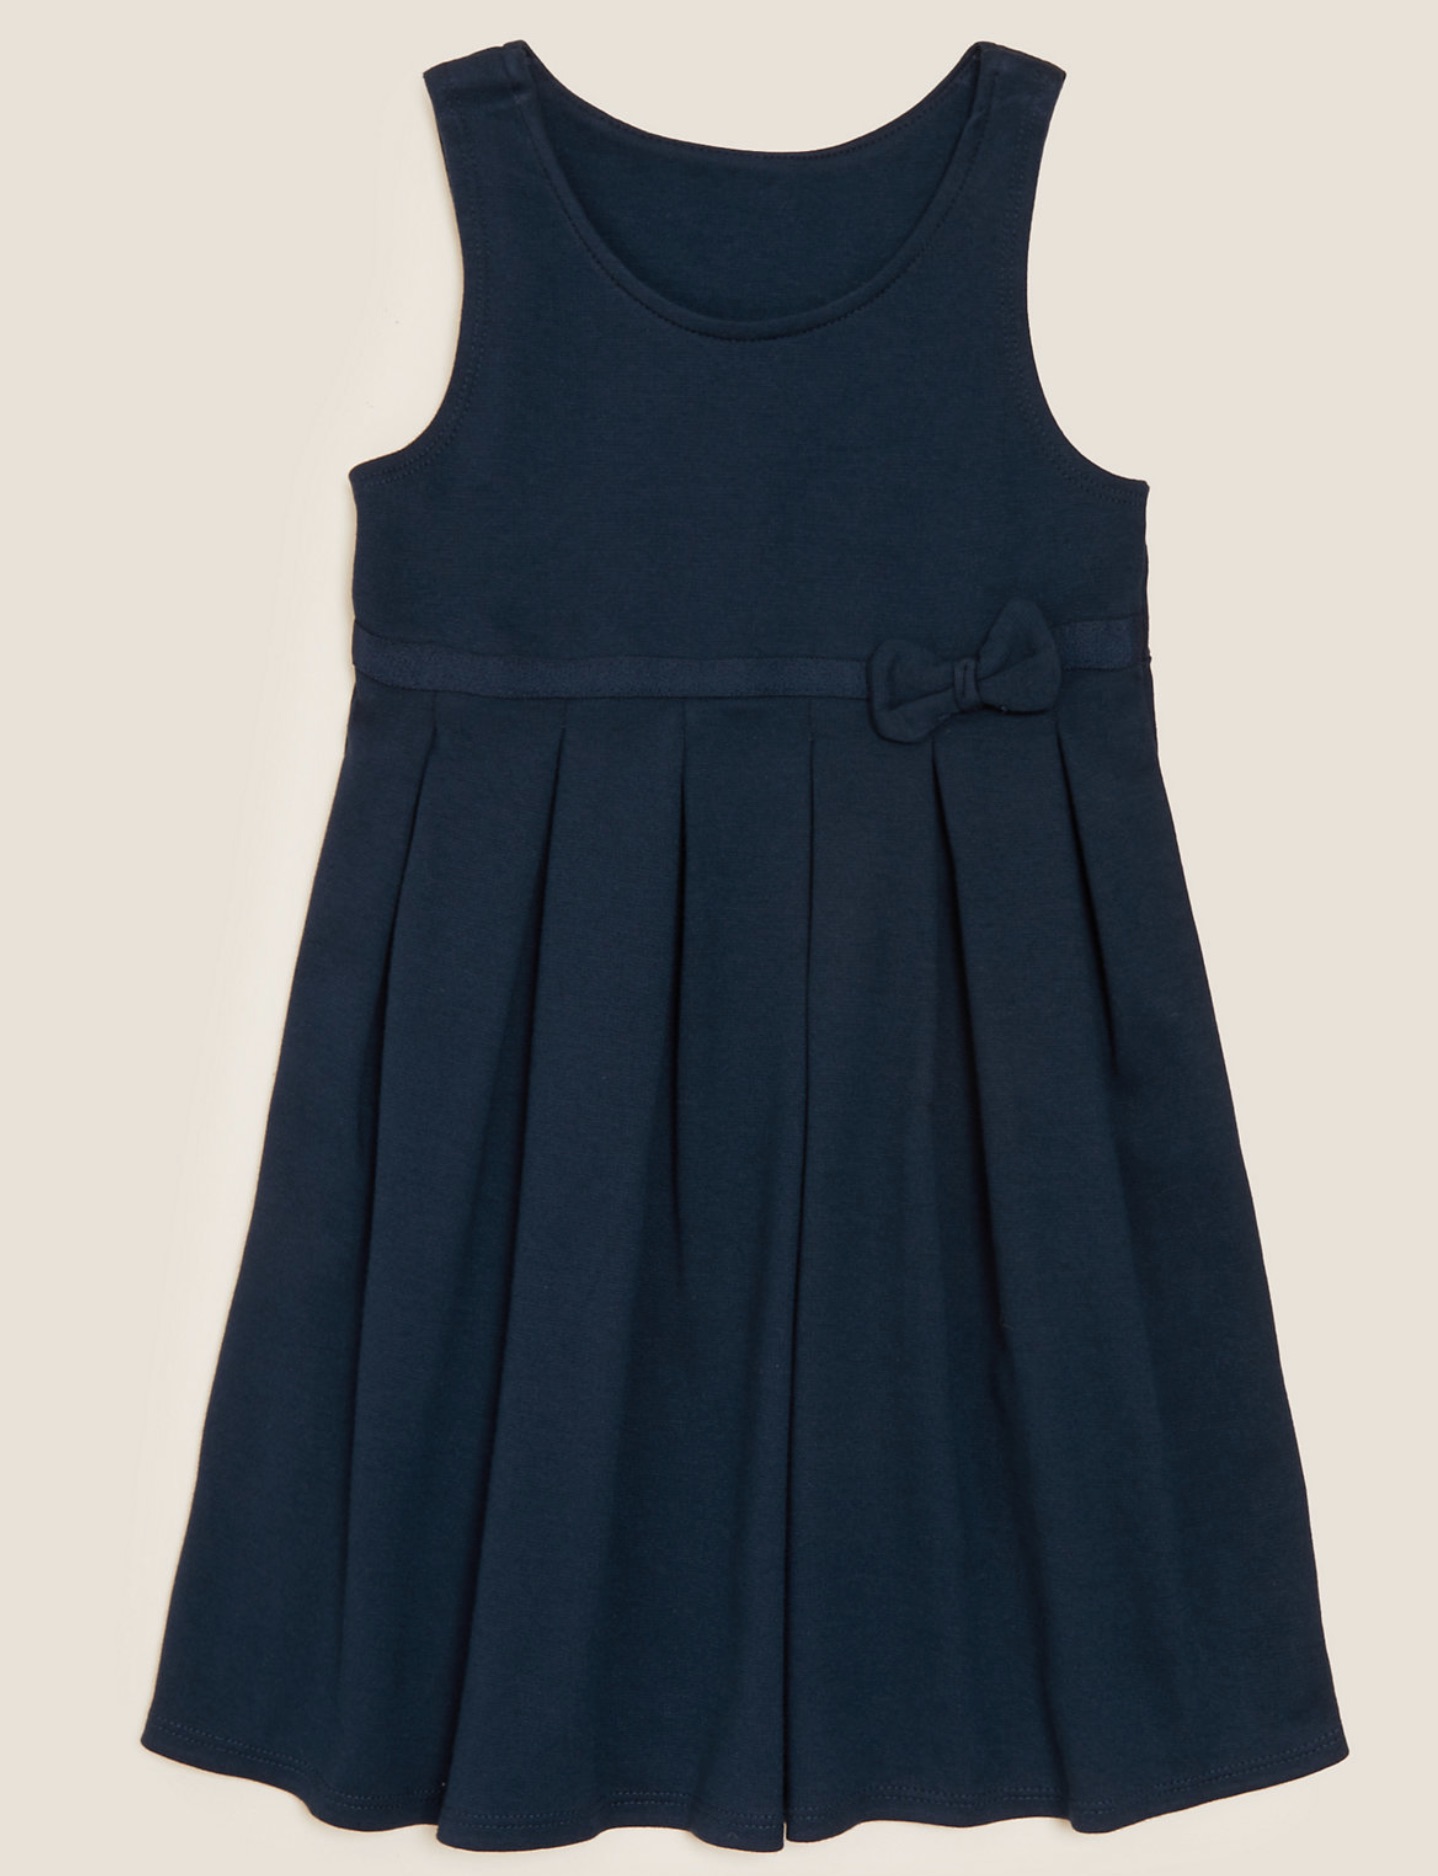 Girls' Navy Jersey Pinafore Dress, Pleated/Gathered Waist 5-6 Y